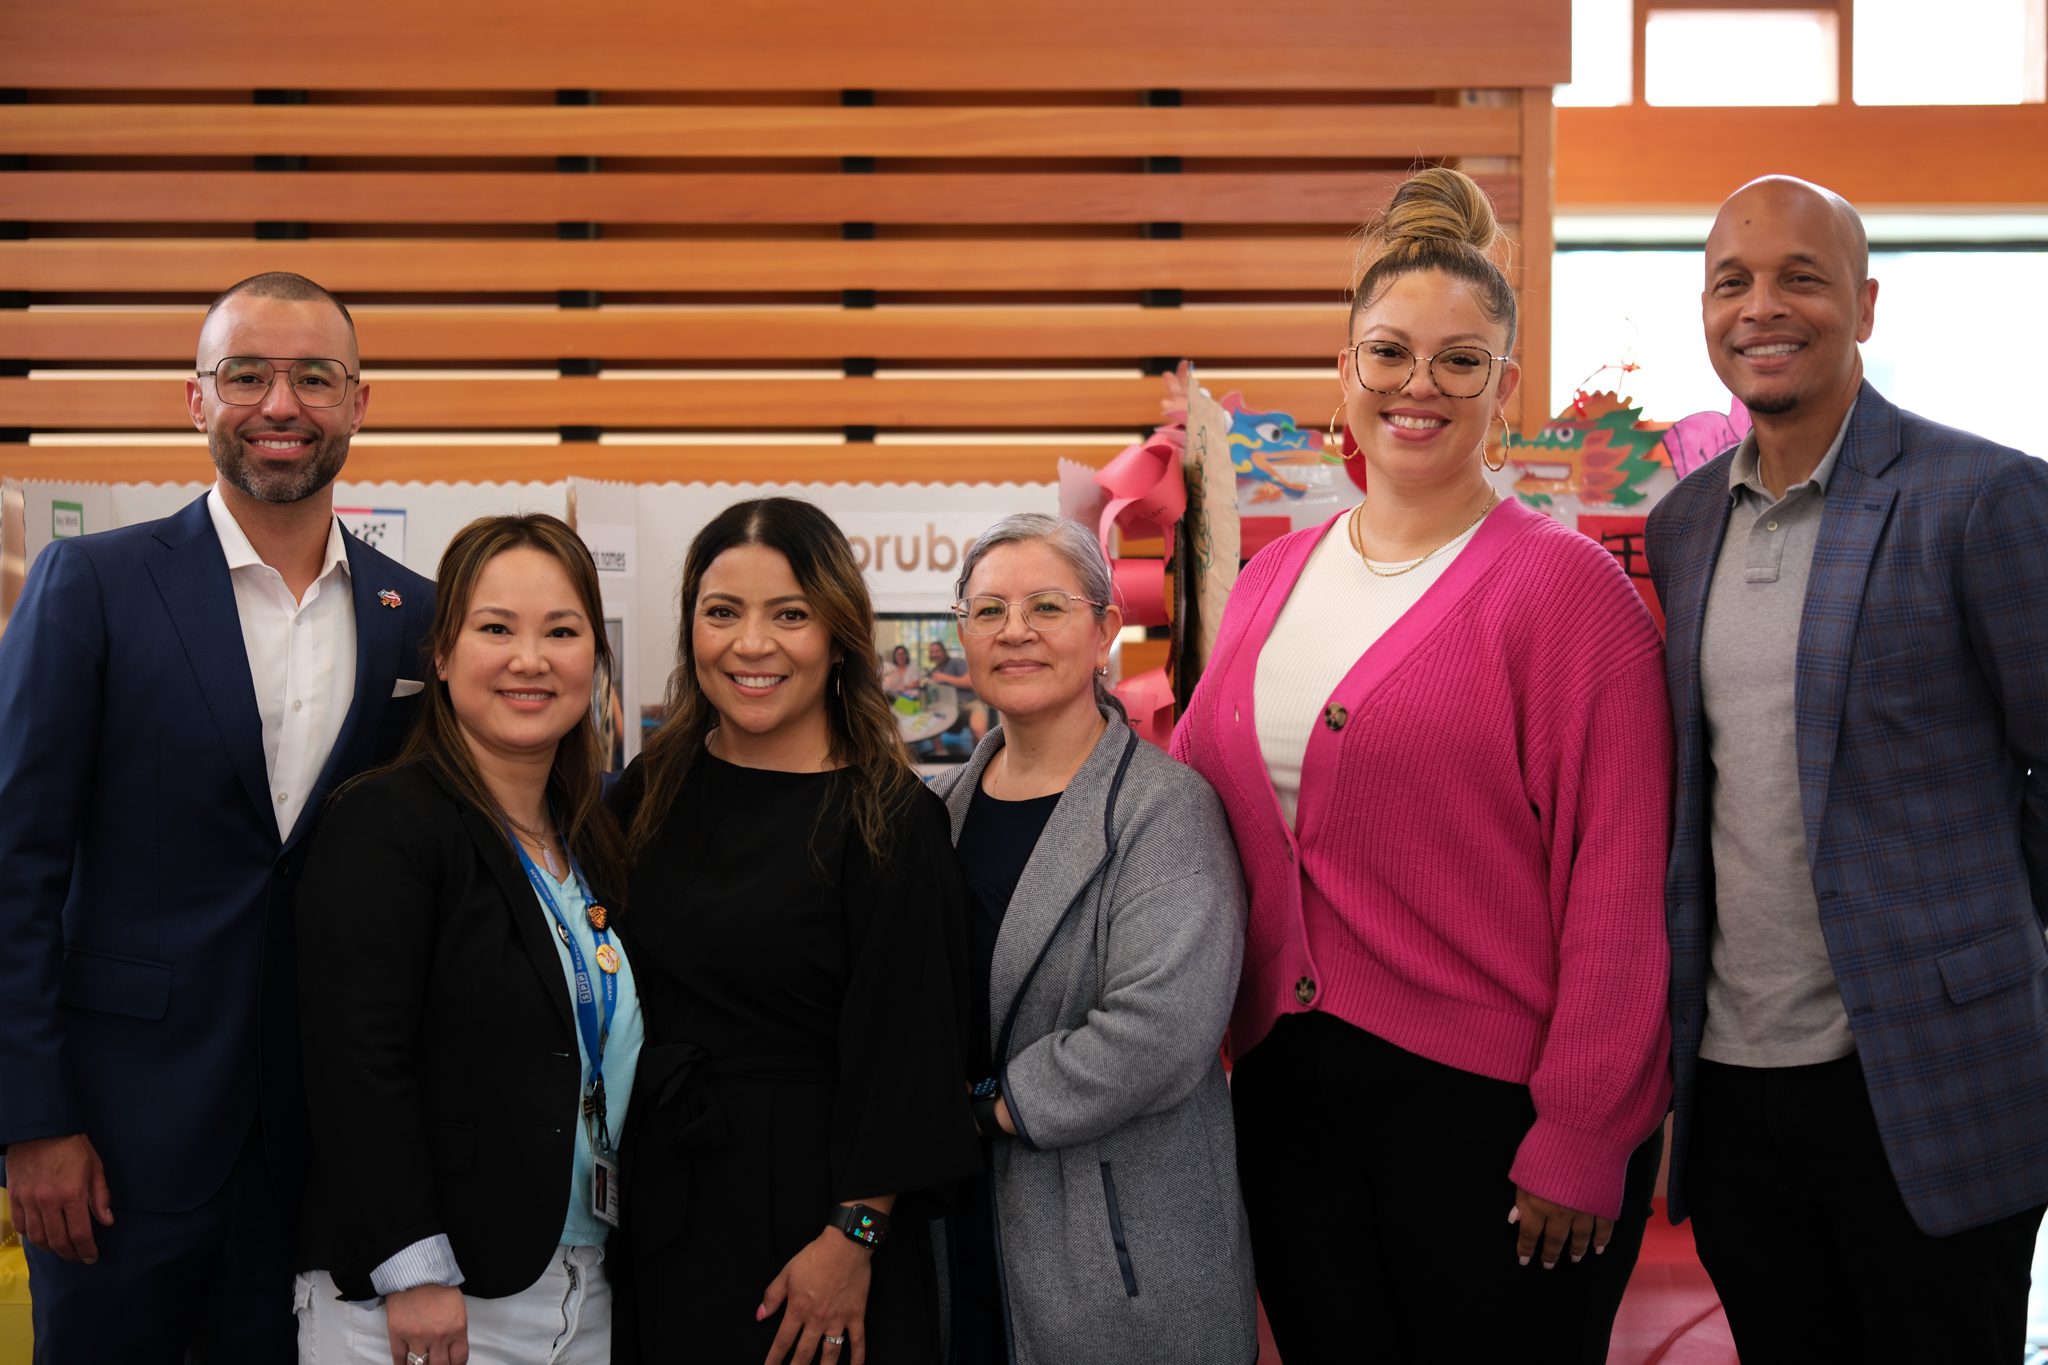 From L-to-R: Daniel Perez, Program Manager, DEEL QPPD; Susan Lee, Early Learning Center Director of Operations, ReWA; Karina Rojas Rodriguez, Center Director, SouthWest Early Learning Bilingual Preschool; Dr. Luz Casio, Director of Refugee and Immigrant Family Center Bilingual Preschool; Isolina Campbell-Cronin, Education Director, Center for Linguistic and Cultural Democracy; Dr. Dwane Chappelle, Director of DEEL. 